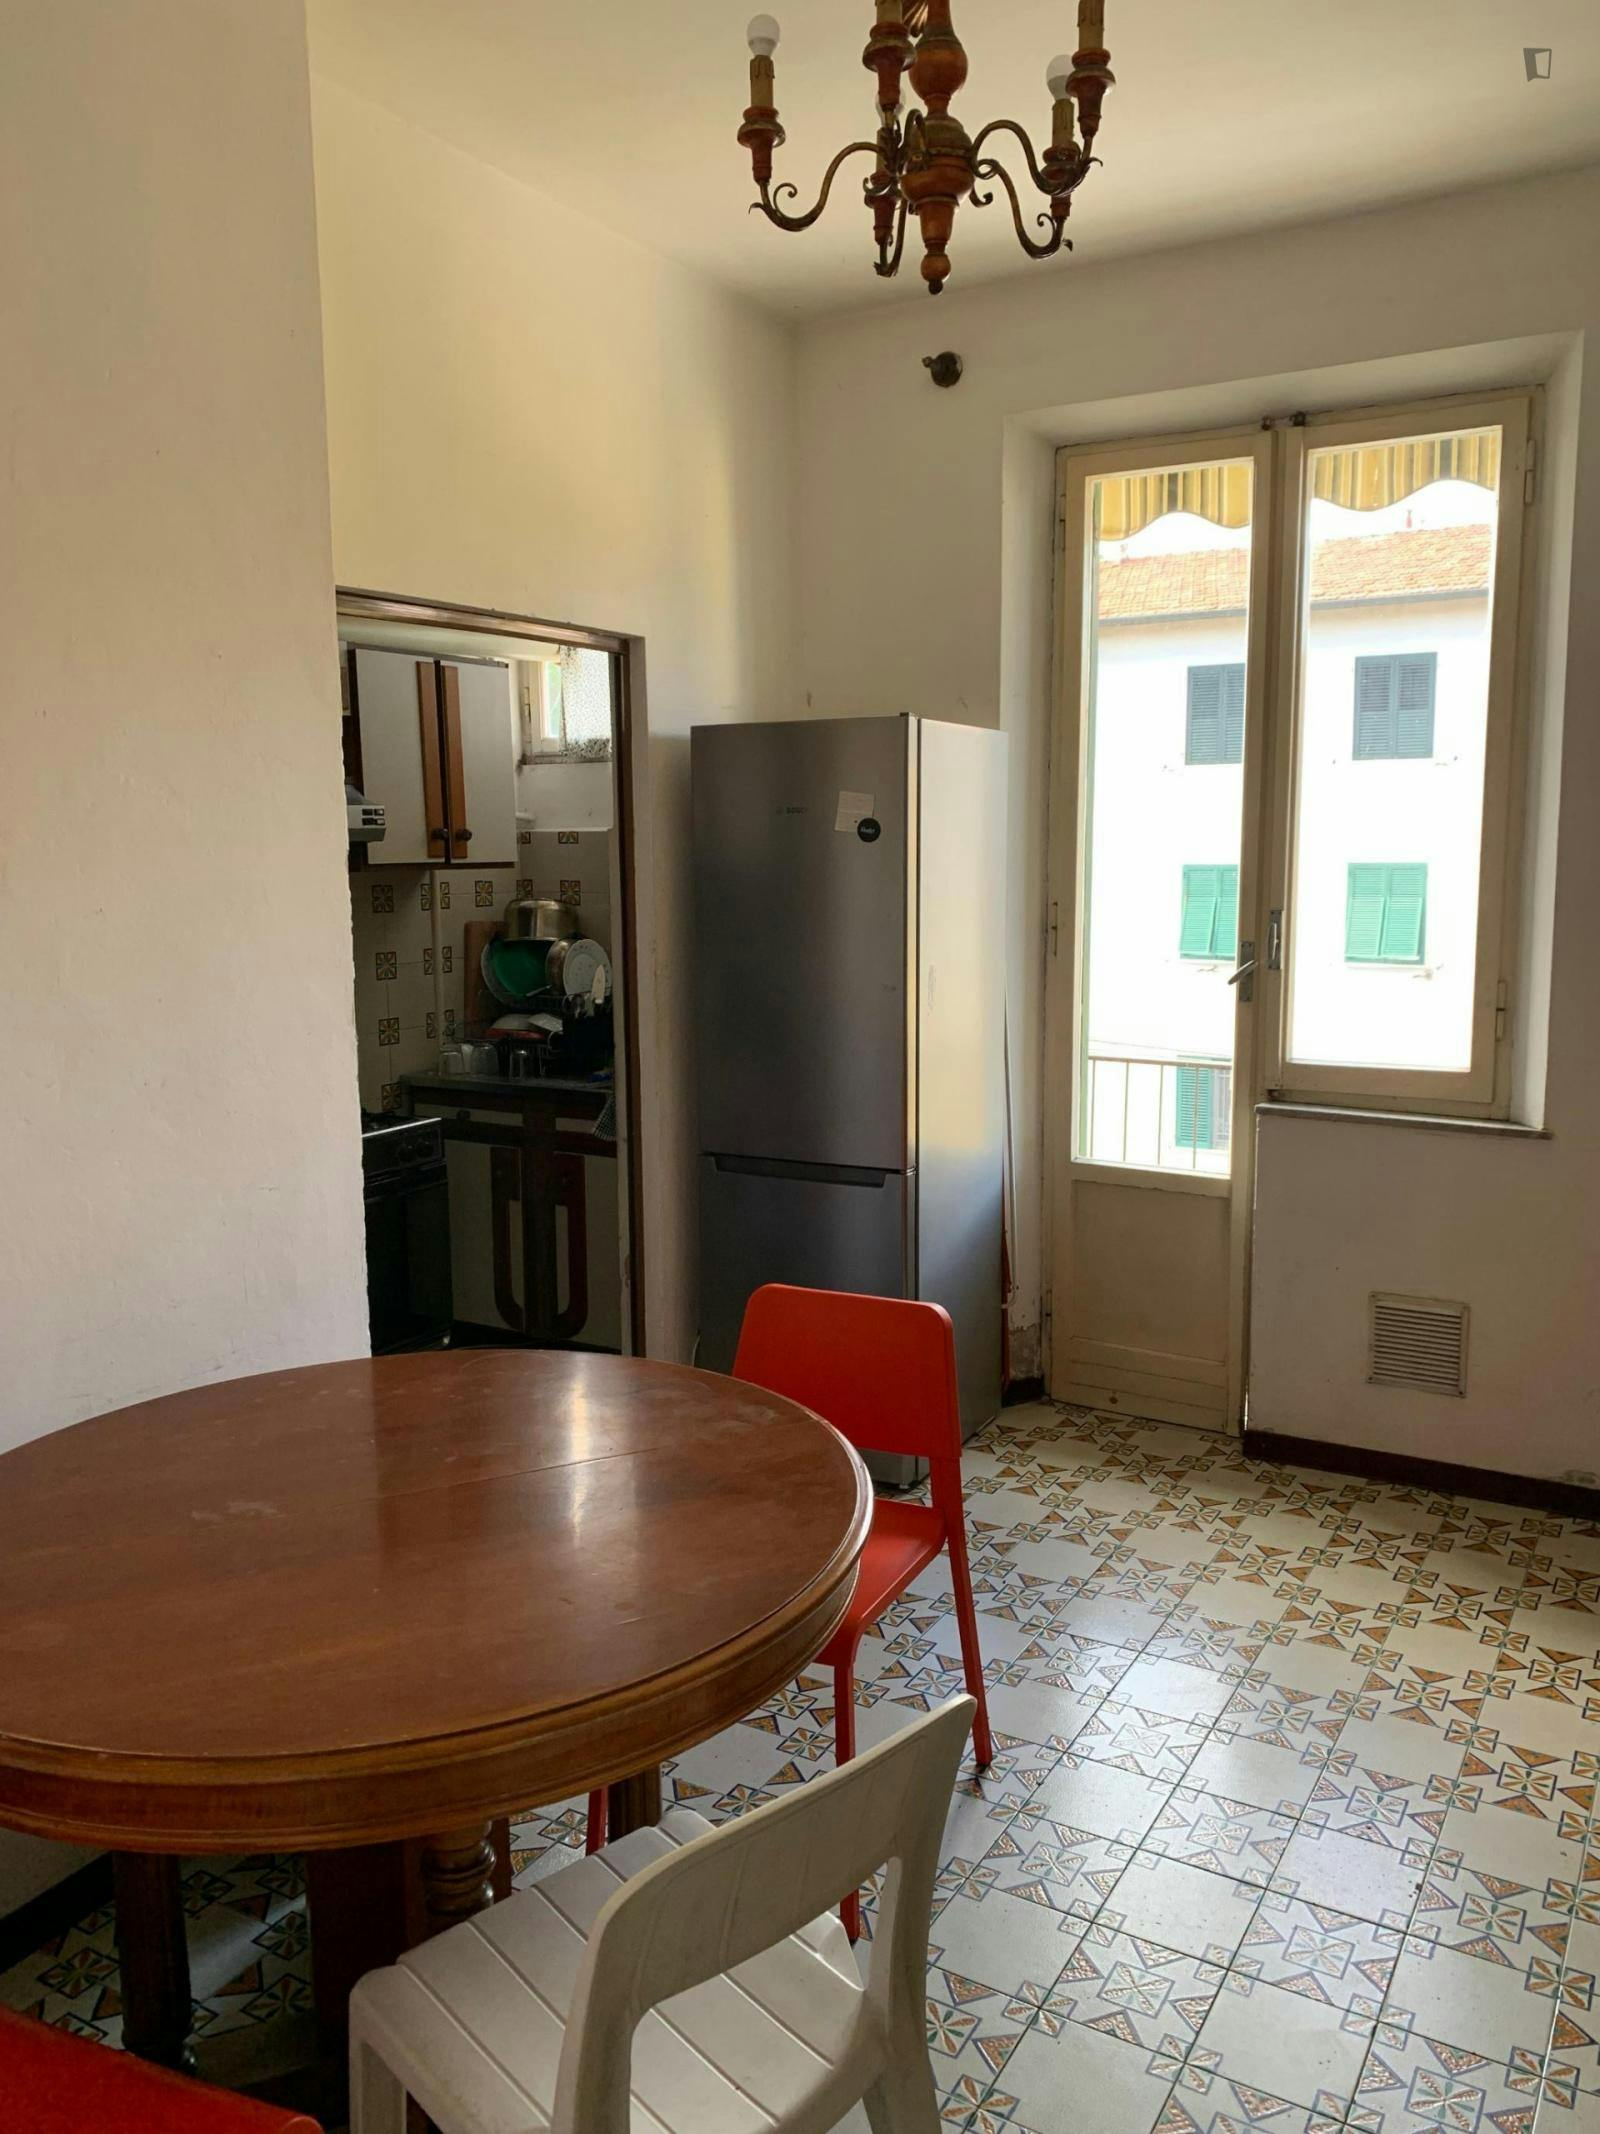 Homely single bedroom near the centre of Pisa